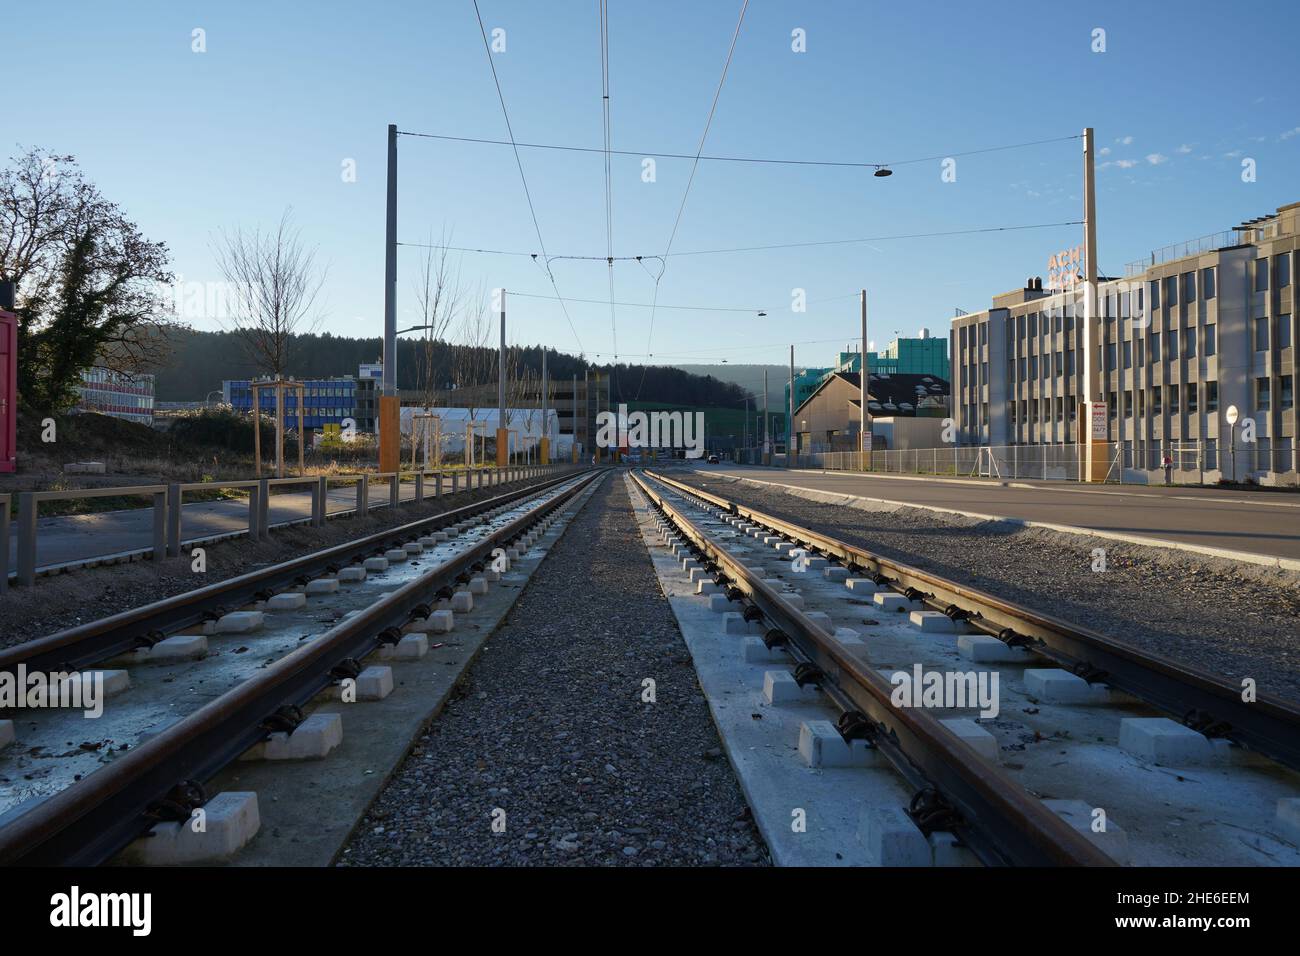 Civil engineering of street car line with rails on the ground. Stock Photo